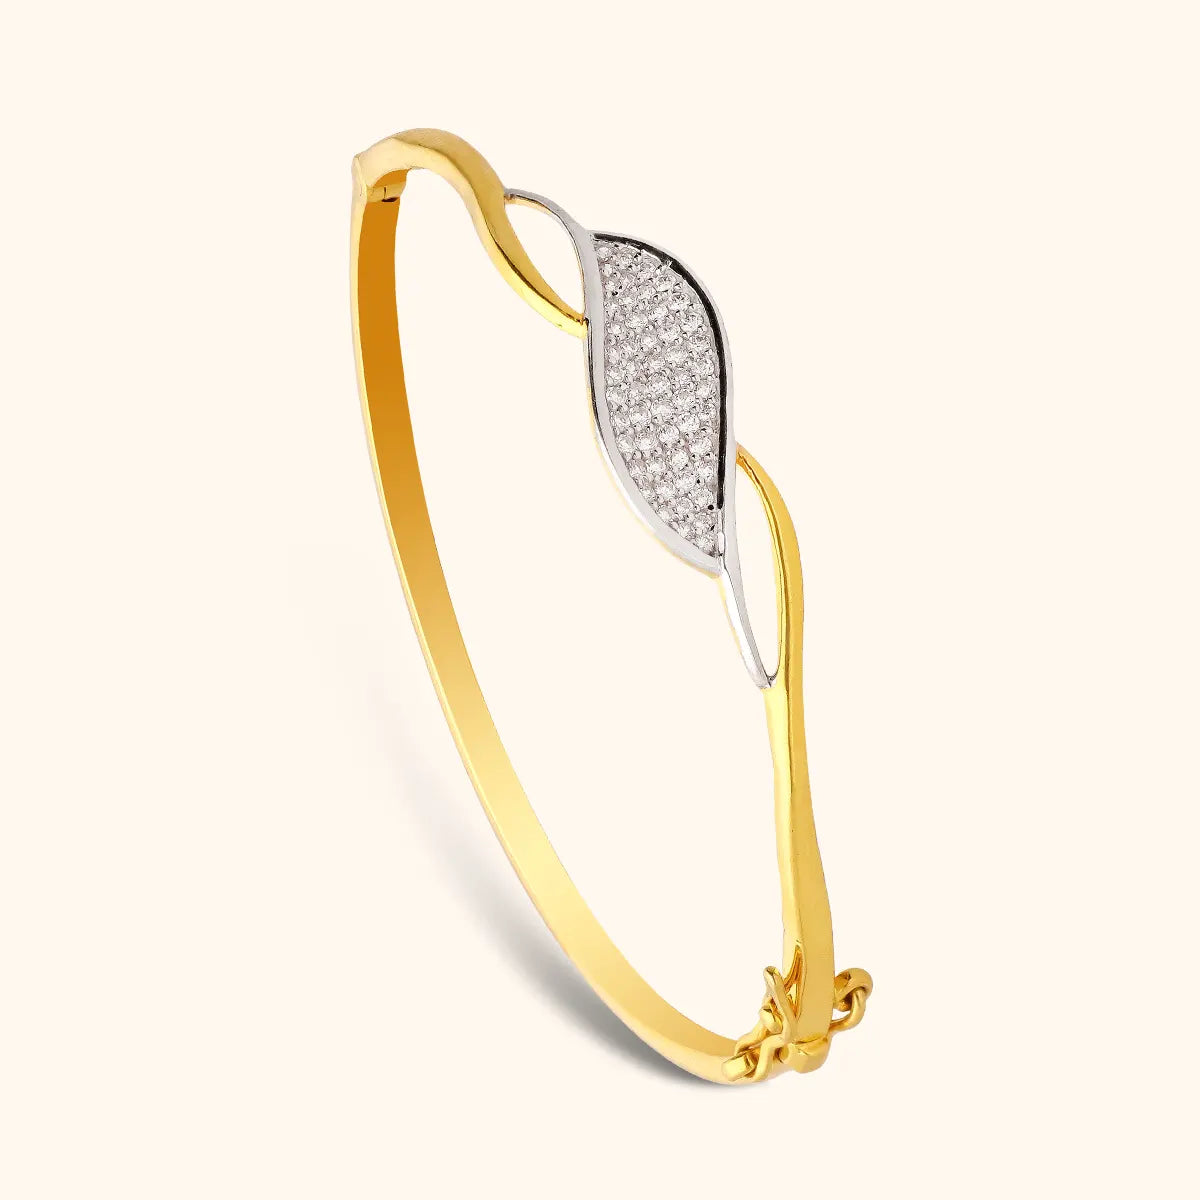 Amazon.com: SUTTONRAL Delicate Moissanite Leaf Bracelet - Trendy Classic Design  Bracelet with 14K Gold and Emerald Stones - Mother's Day Gift (White Gold):  Clothing, Shoes & Jewelry